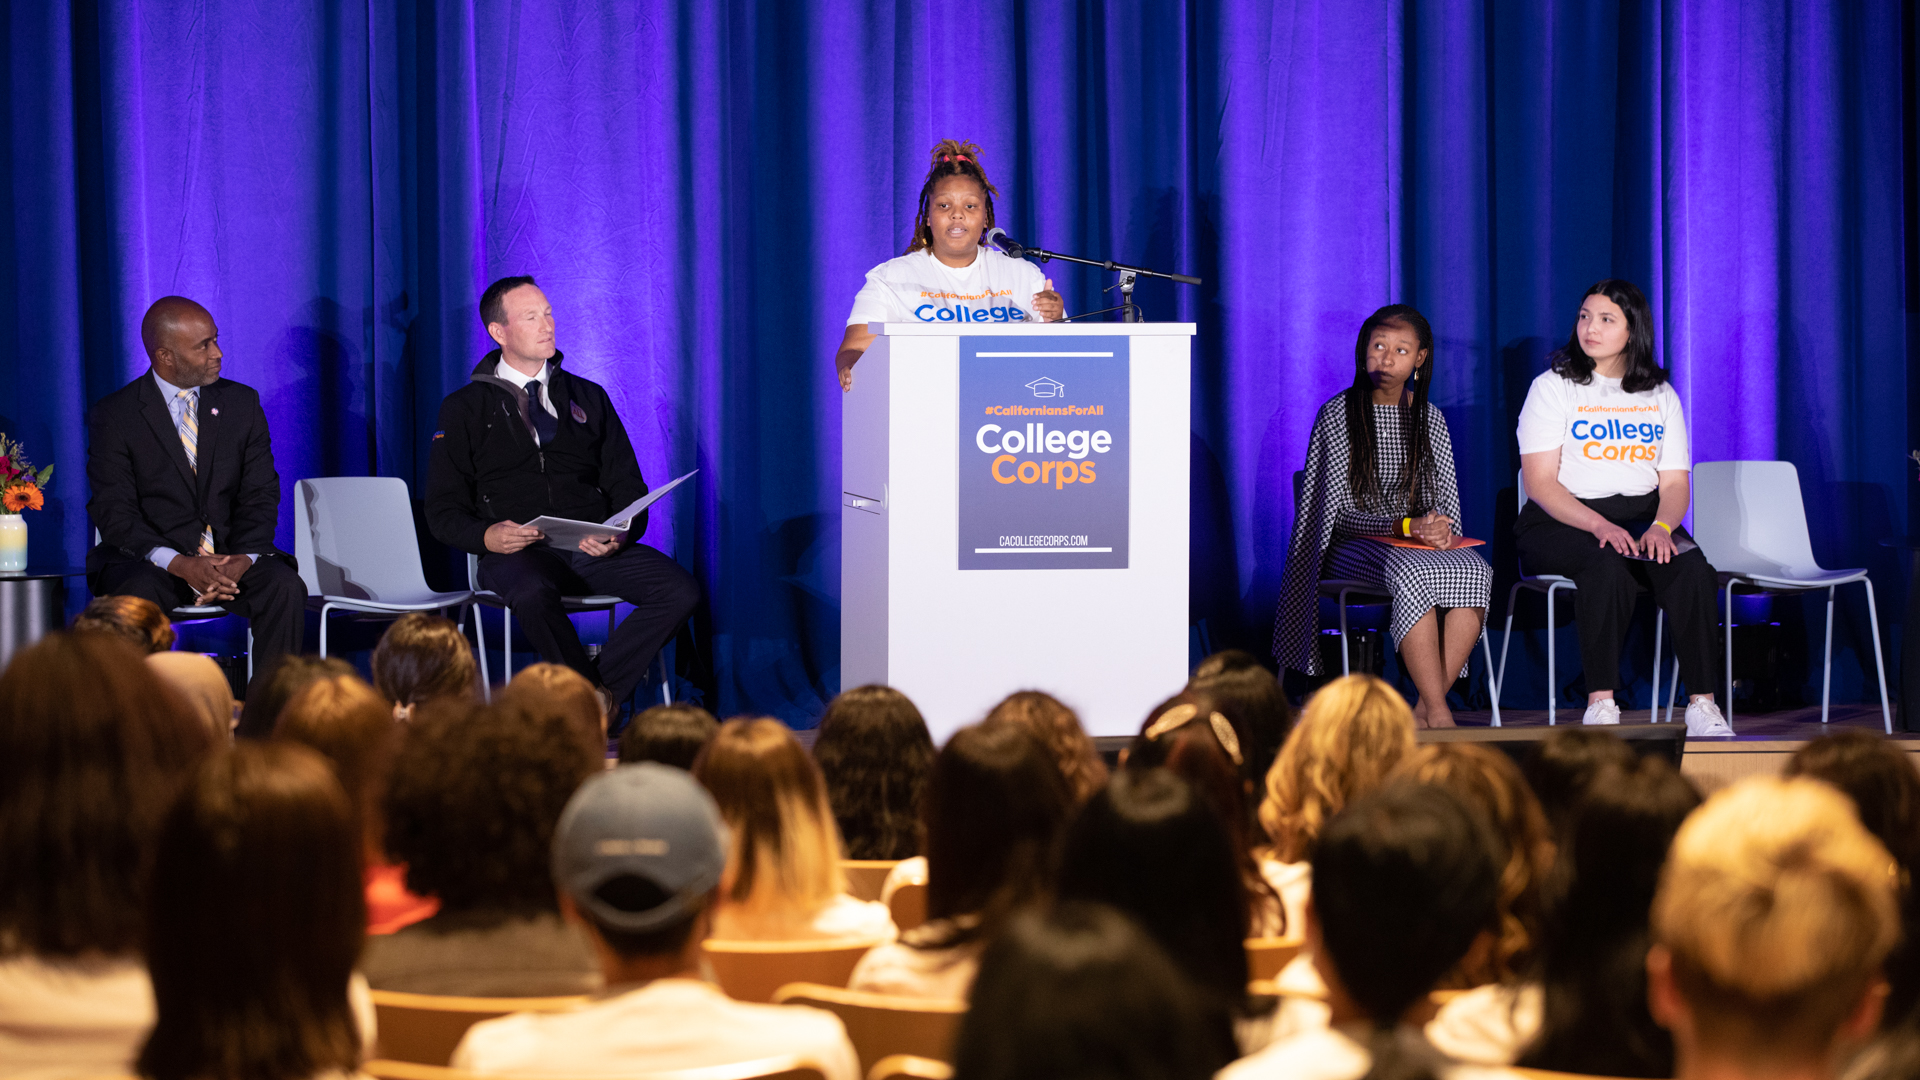 Sac State student Tia Rowe speaks at a podium on stage during an event for the inaugural #CaliforniansForAll College Corps class.